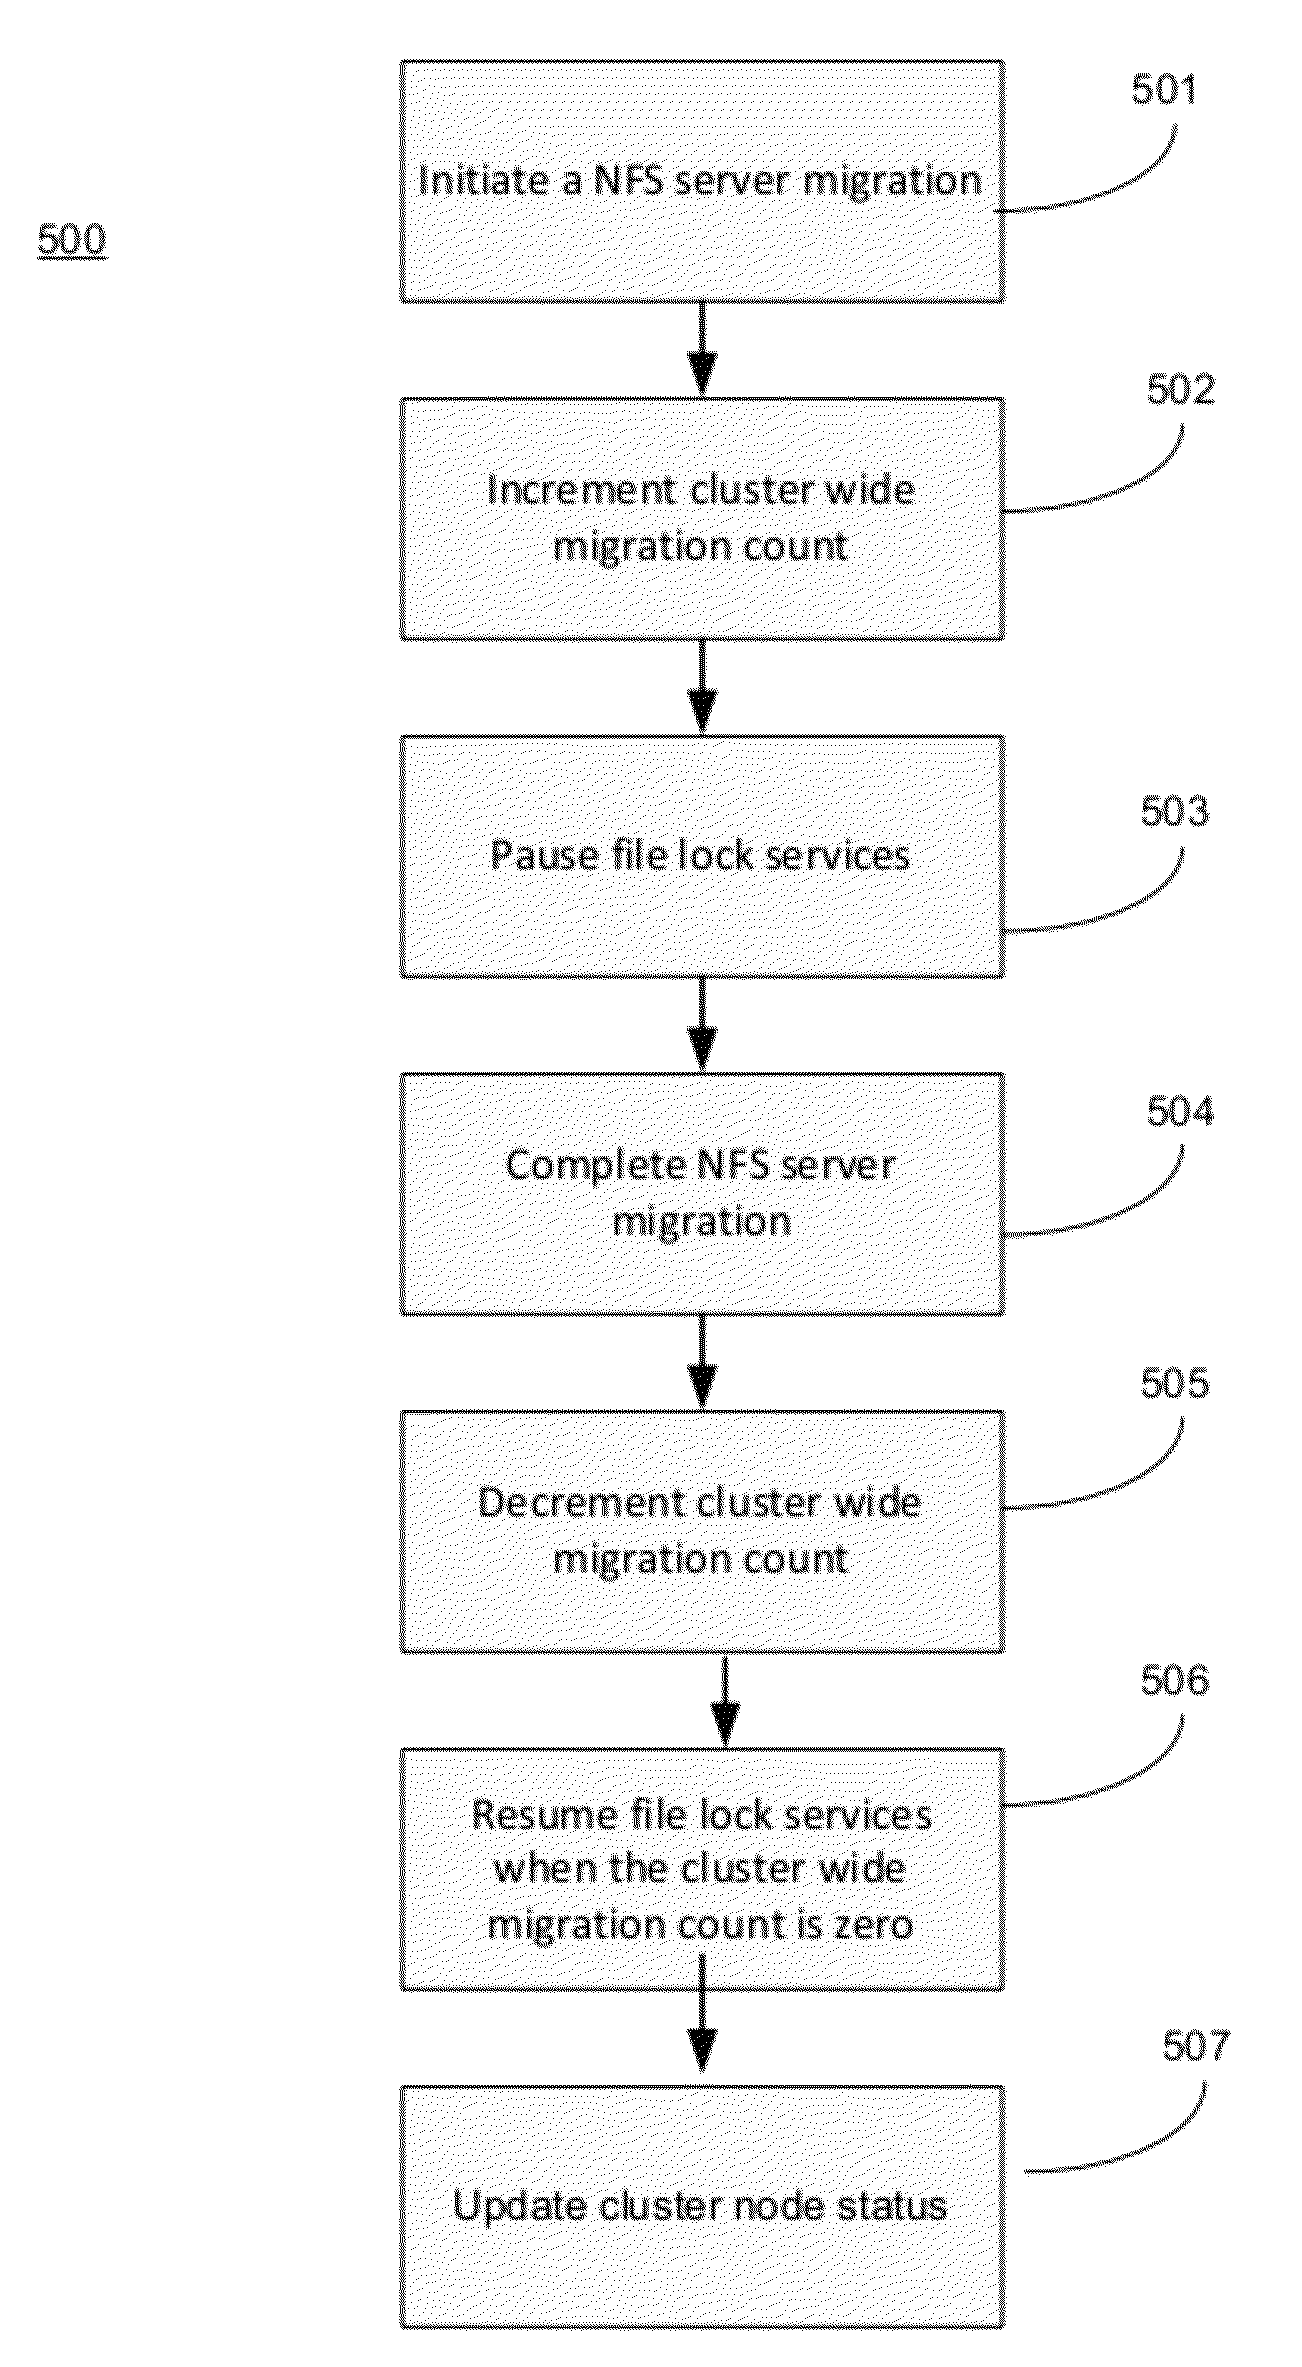 Method and system for restarting file lock services at an adoptive node during a network filesystem server migration or failover